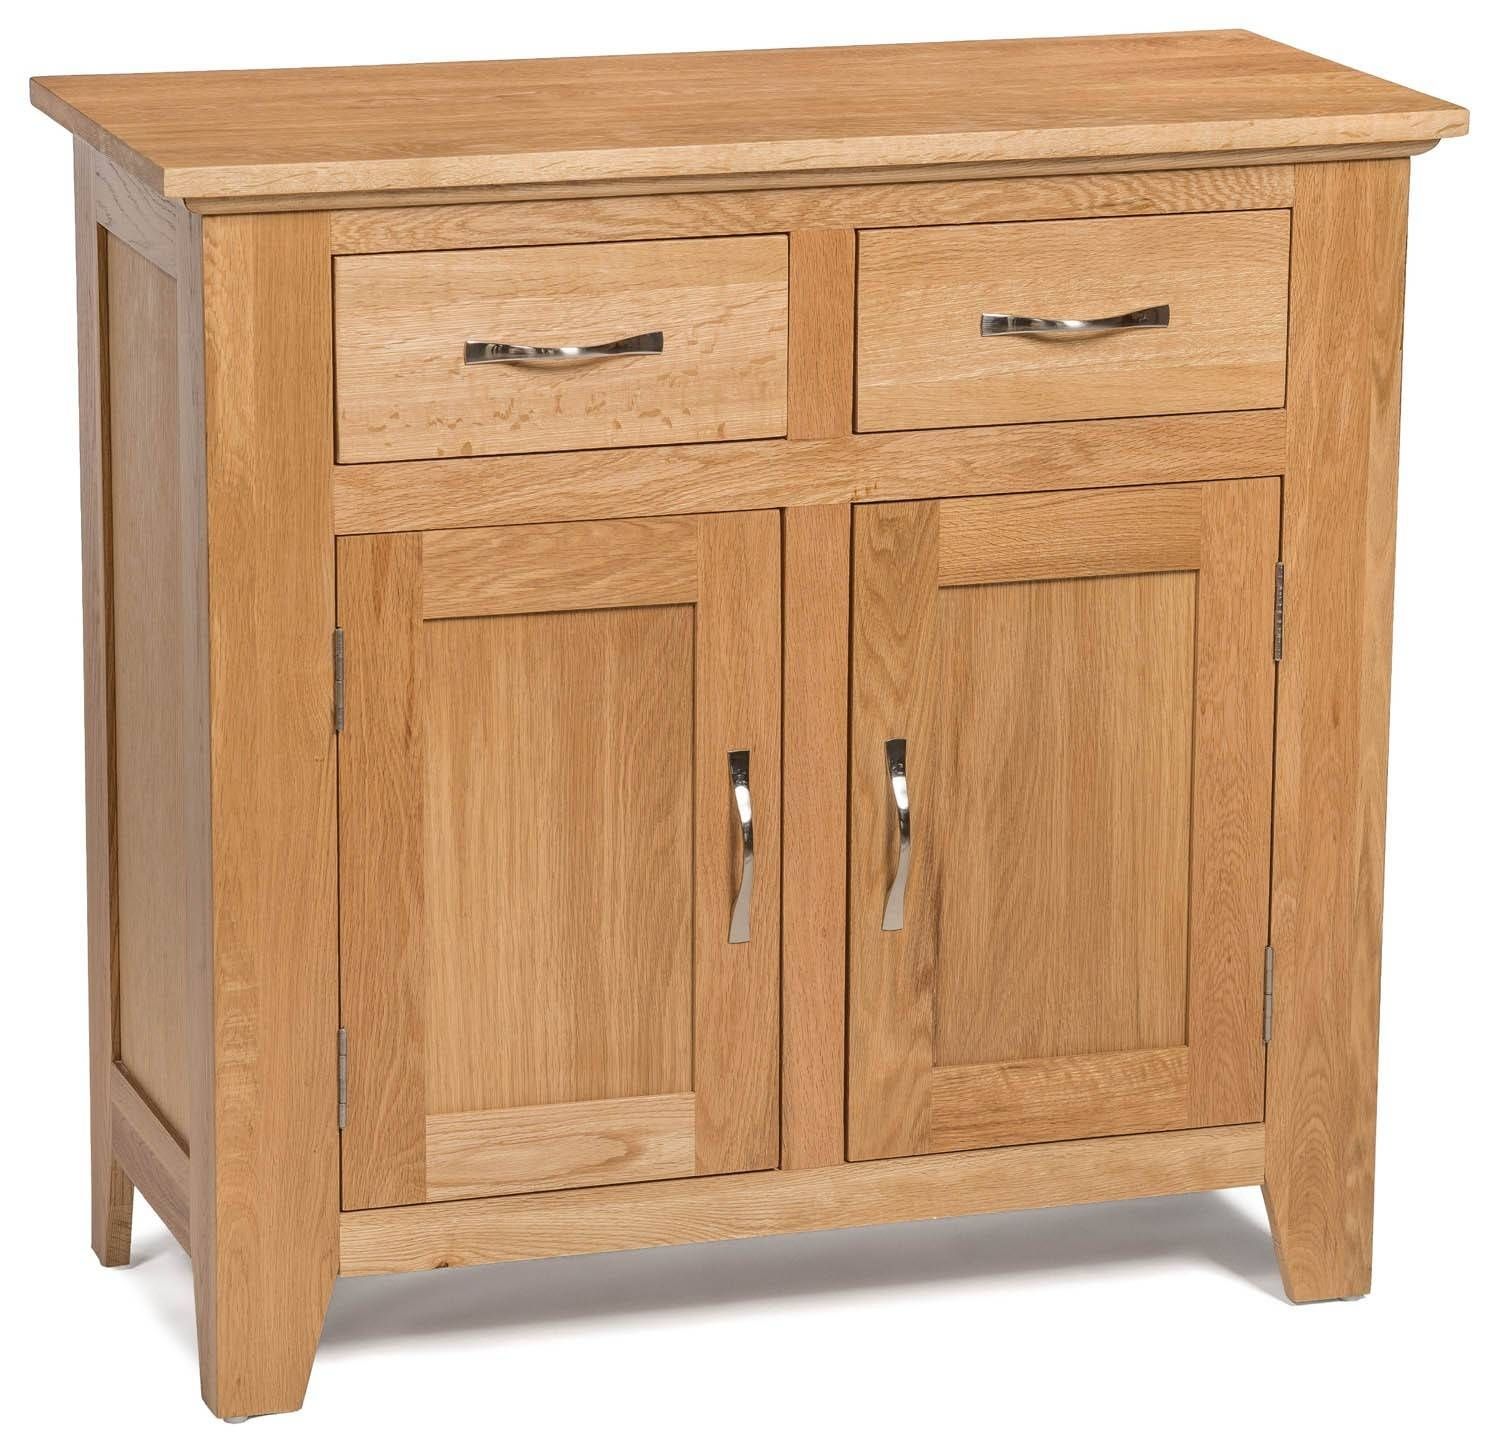 Camberley Oak Small 2 Door 2 Drawer Sideboard | Hallowood With Regard To Current Solid Oak Small Sideboards (View 10 of 15)